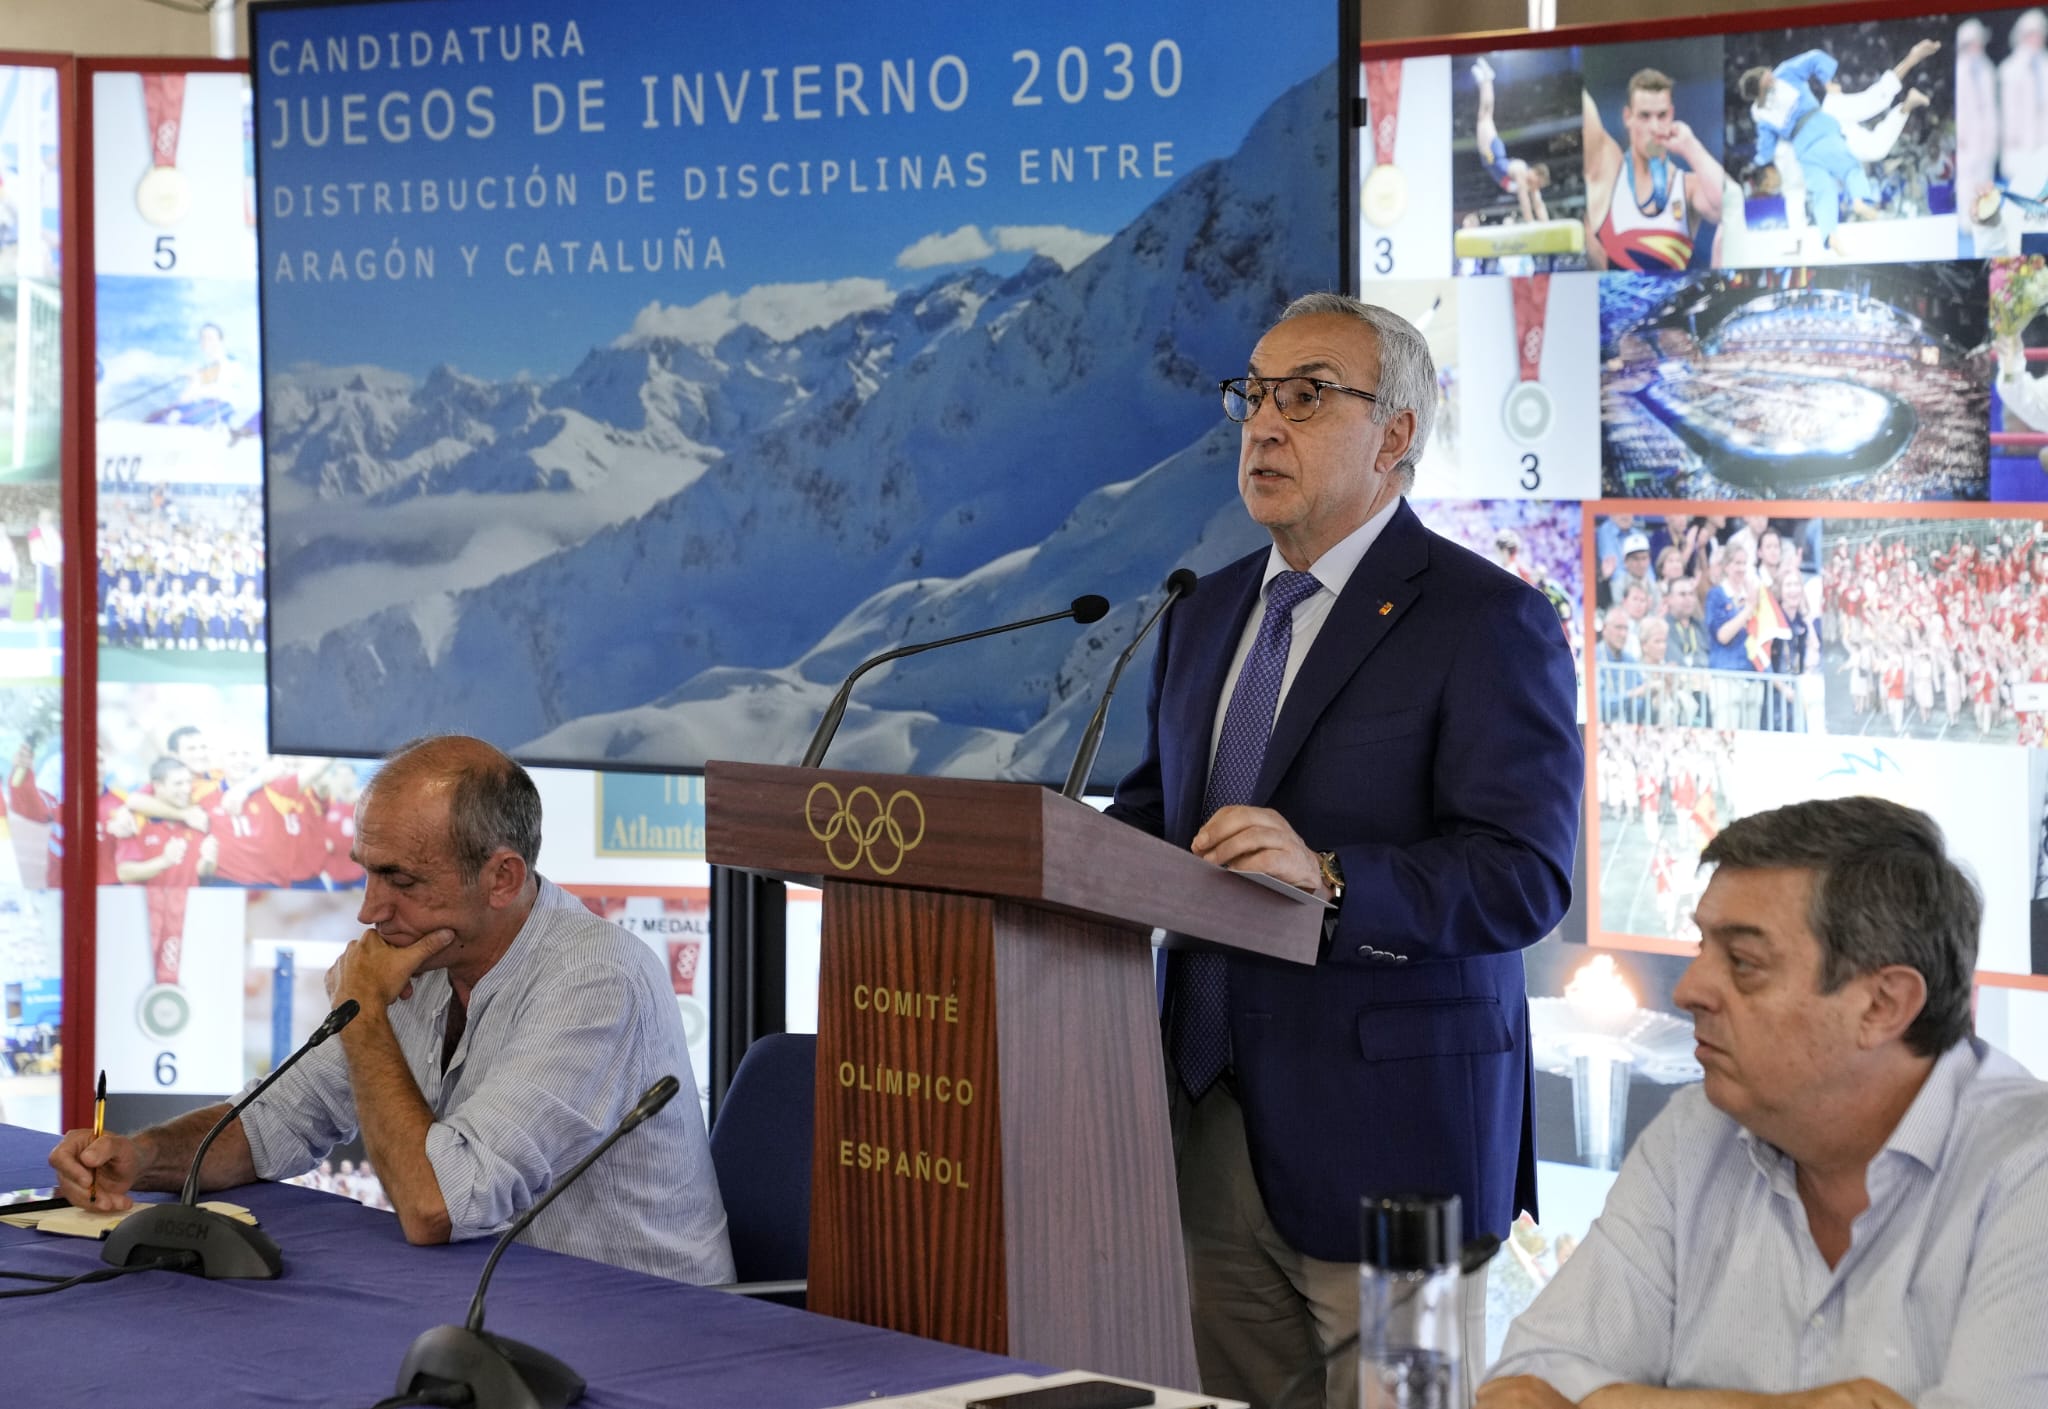 Alejandro Blanco announces the withdrawal of the Spanish candidacy (COE)